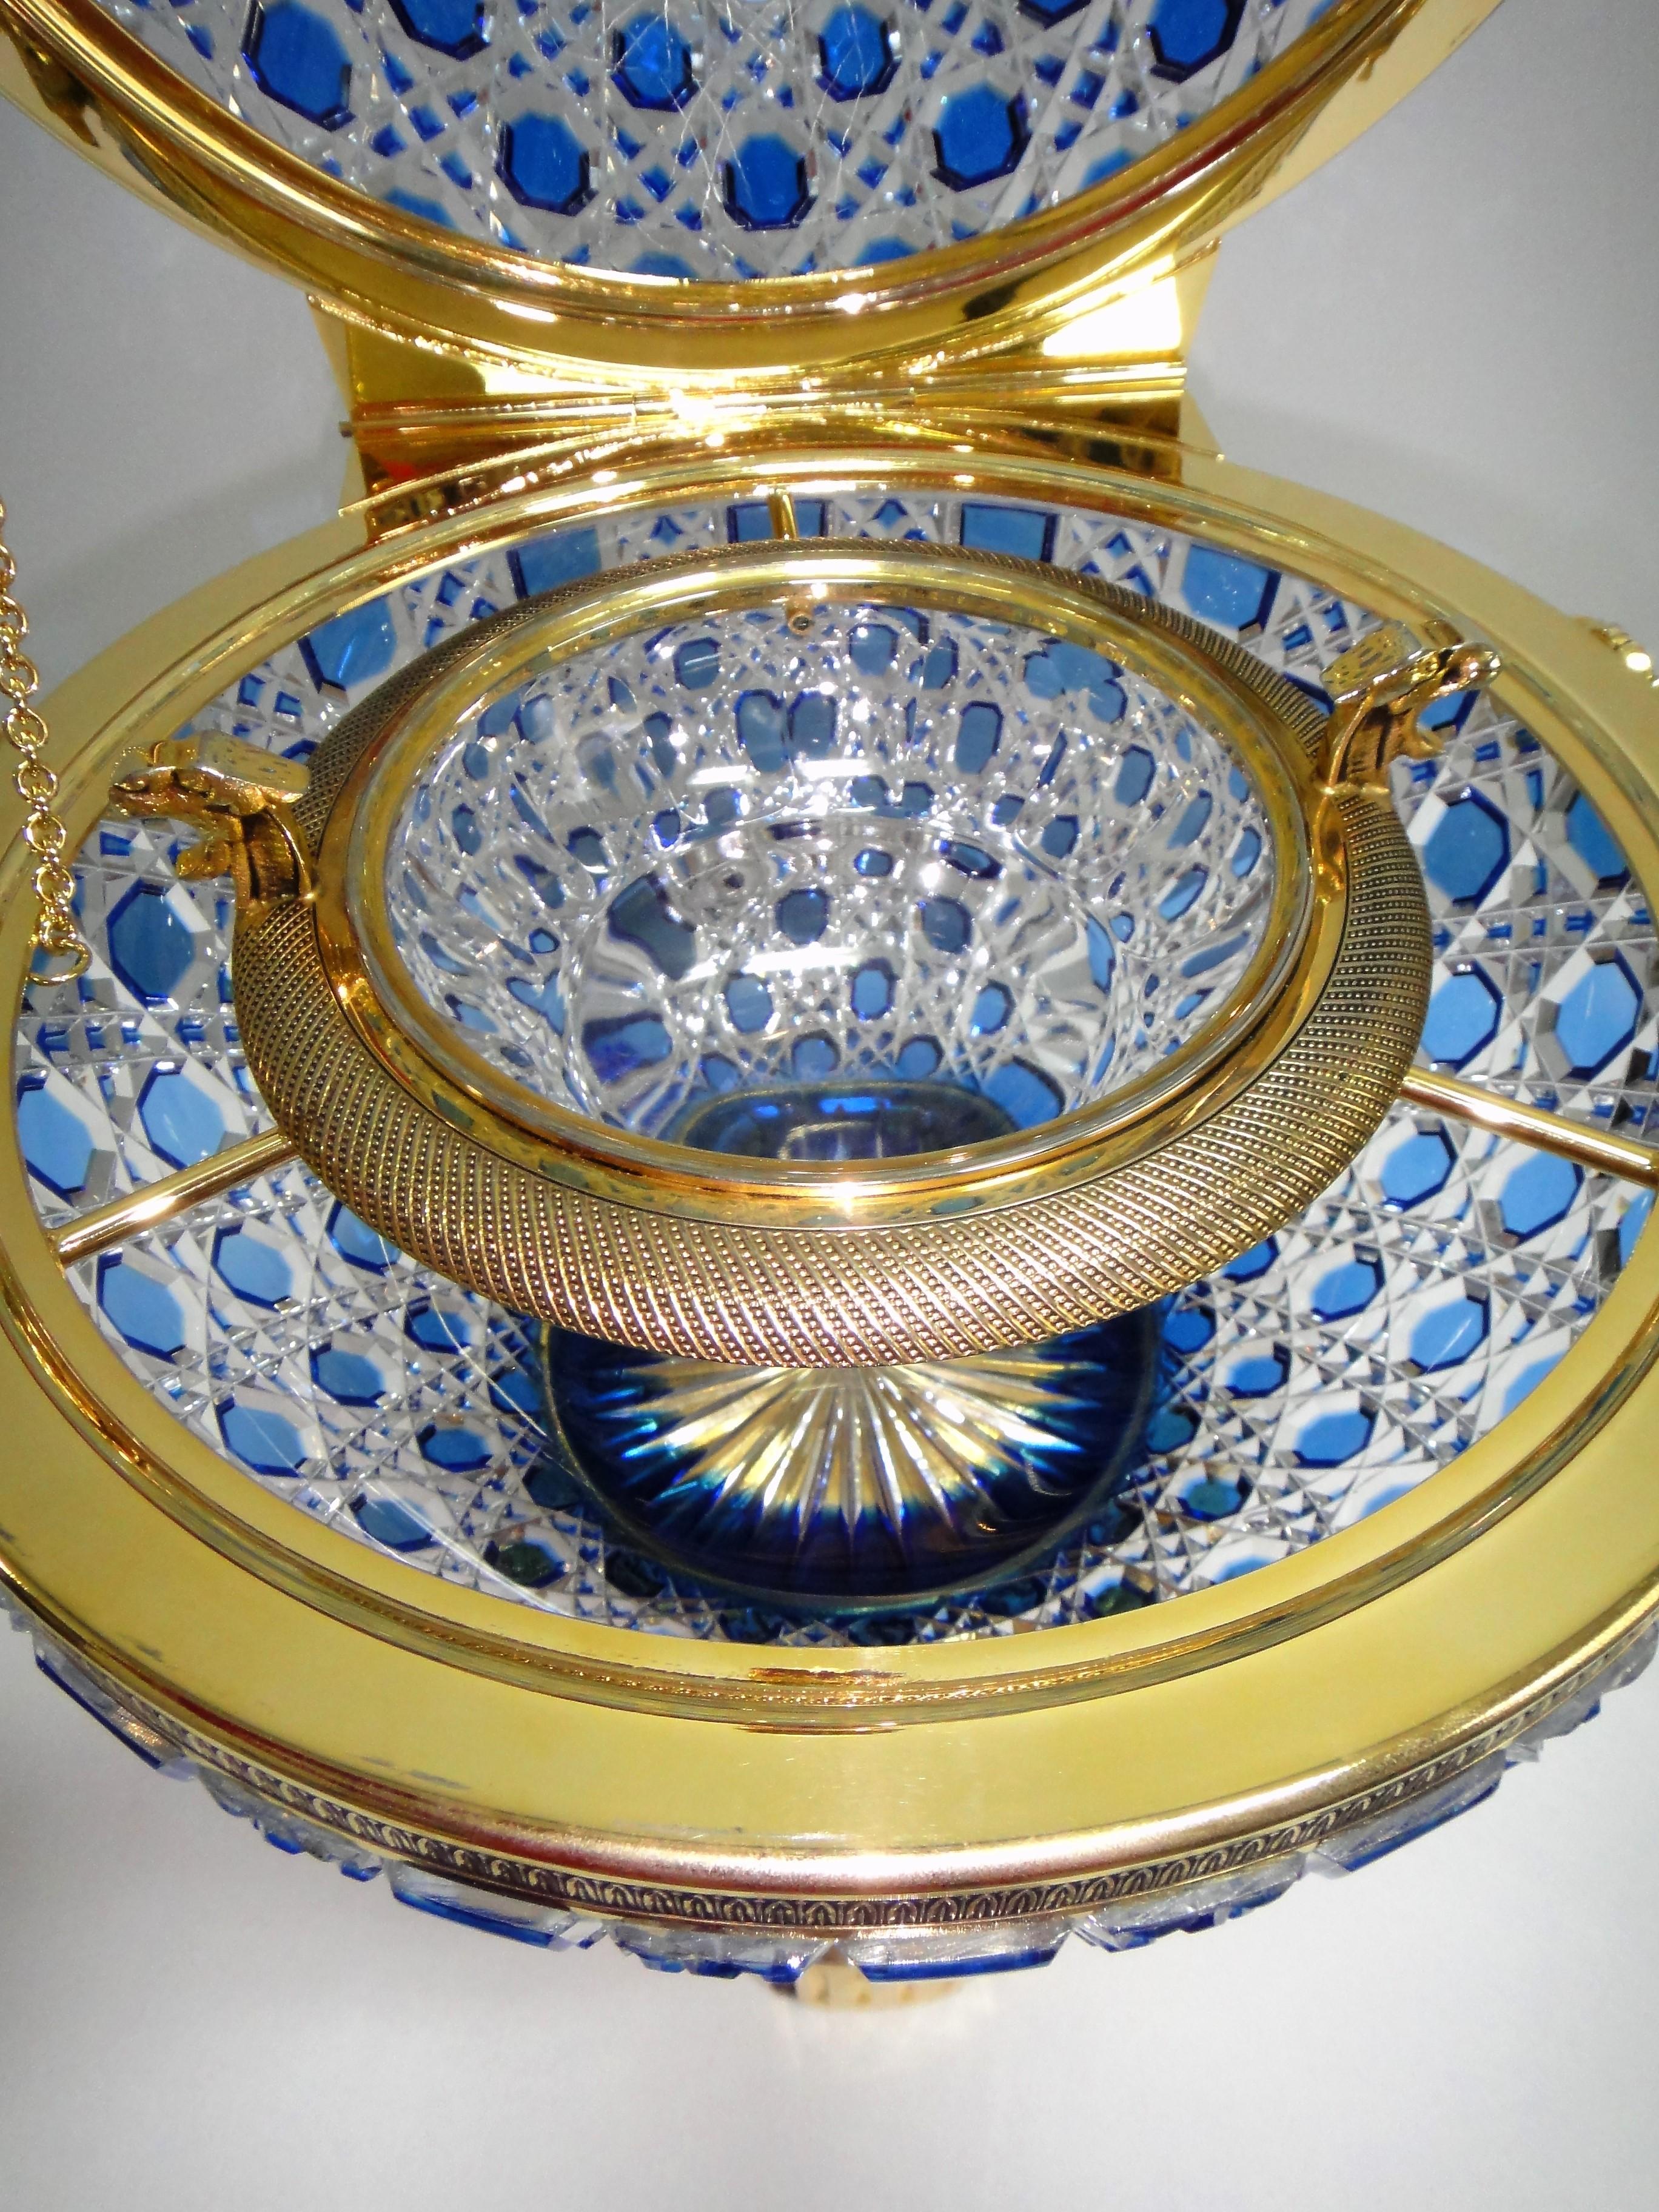 Monumental caviar bowl by crystal Benito Offered for sale is a monumental 20 inch tall cut crystal and 24-karat caviar bowl with a hinged lid by crystal Benito originally designed as part of the 1950s collection. This spectacular piece is made in